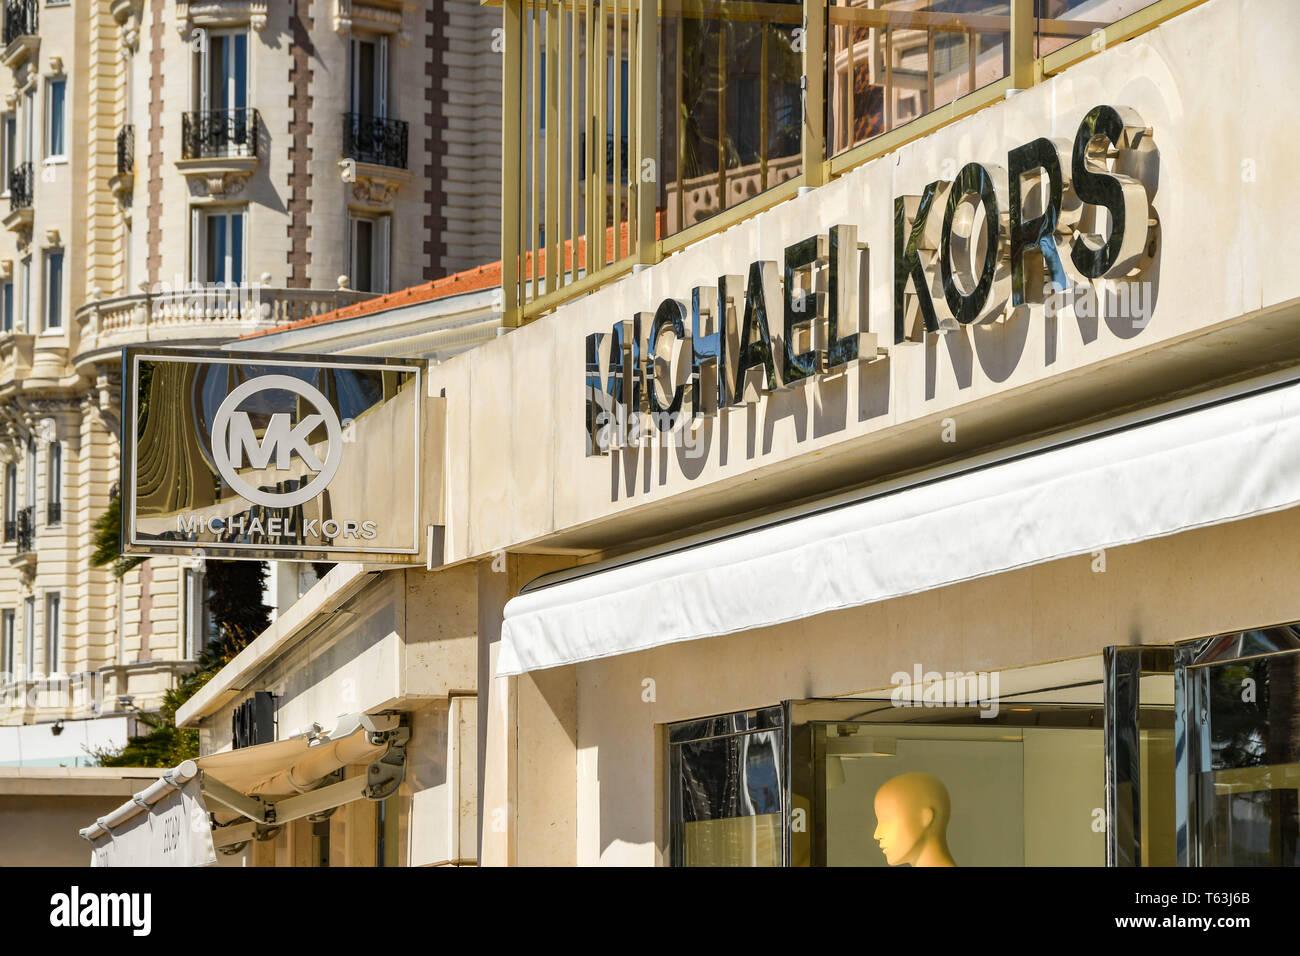 PHUKET, THAILAND - MAY 29, 2022: Michael Kors Brand Retail Shop Logo  Signboard On The Storefront In The Shopping Mall Stock Photo, Picture and  Royalty Free Image. Image 188011033.